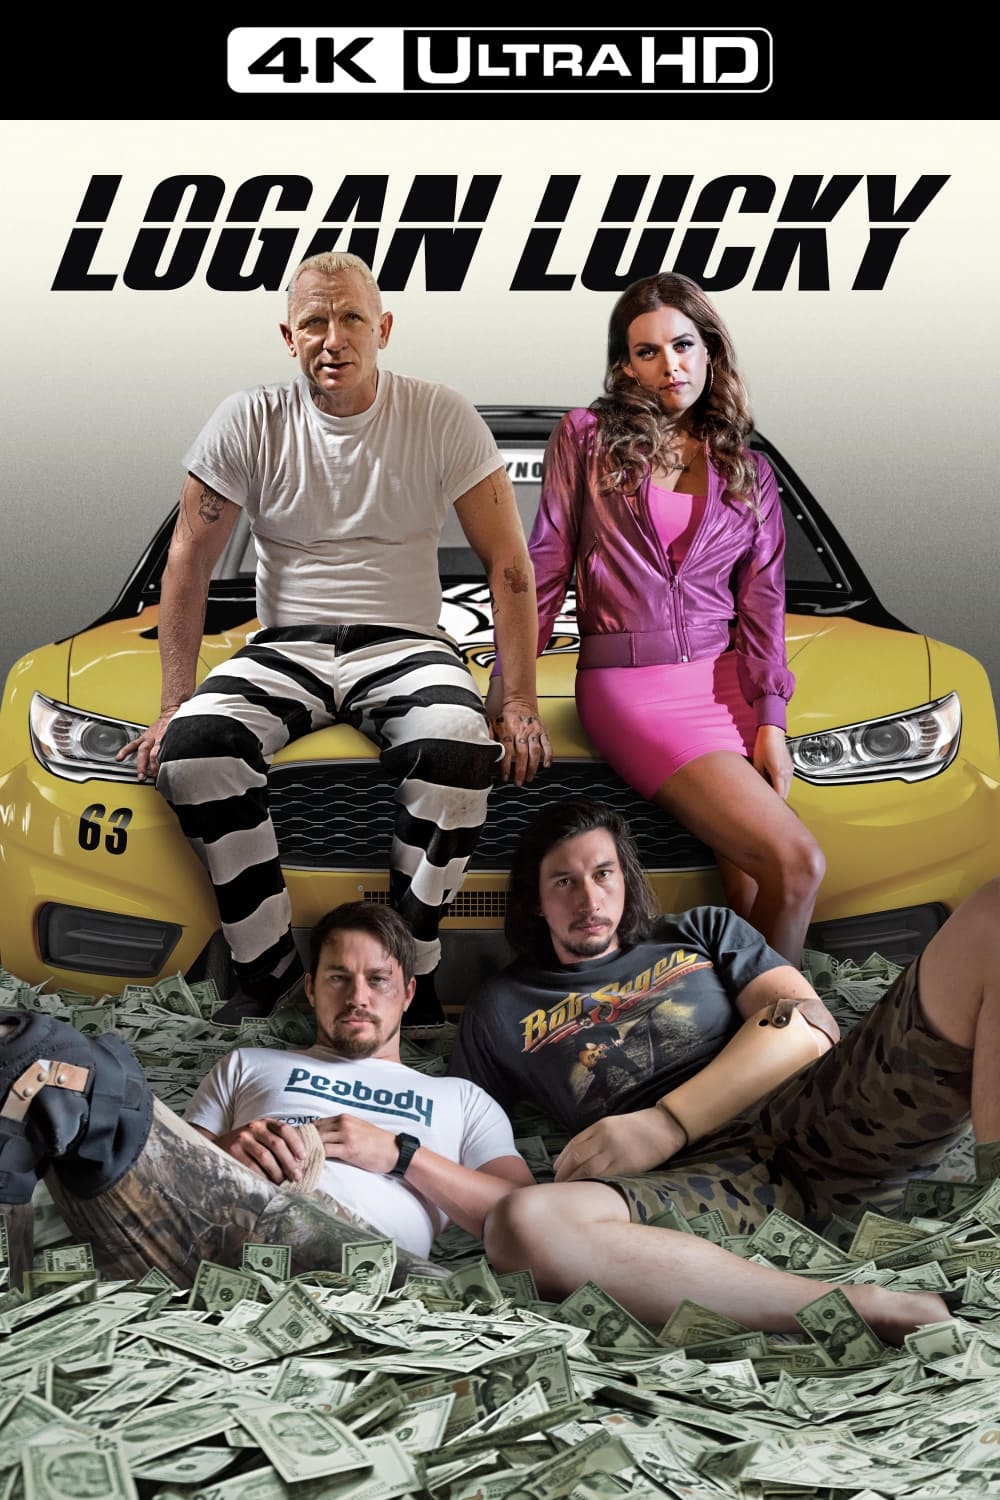 Logan Lucky Movie Poster Wallpapers